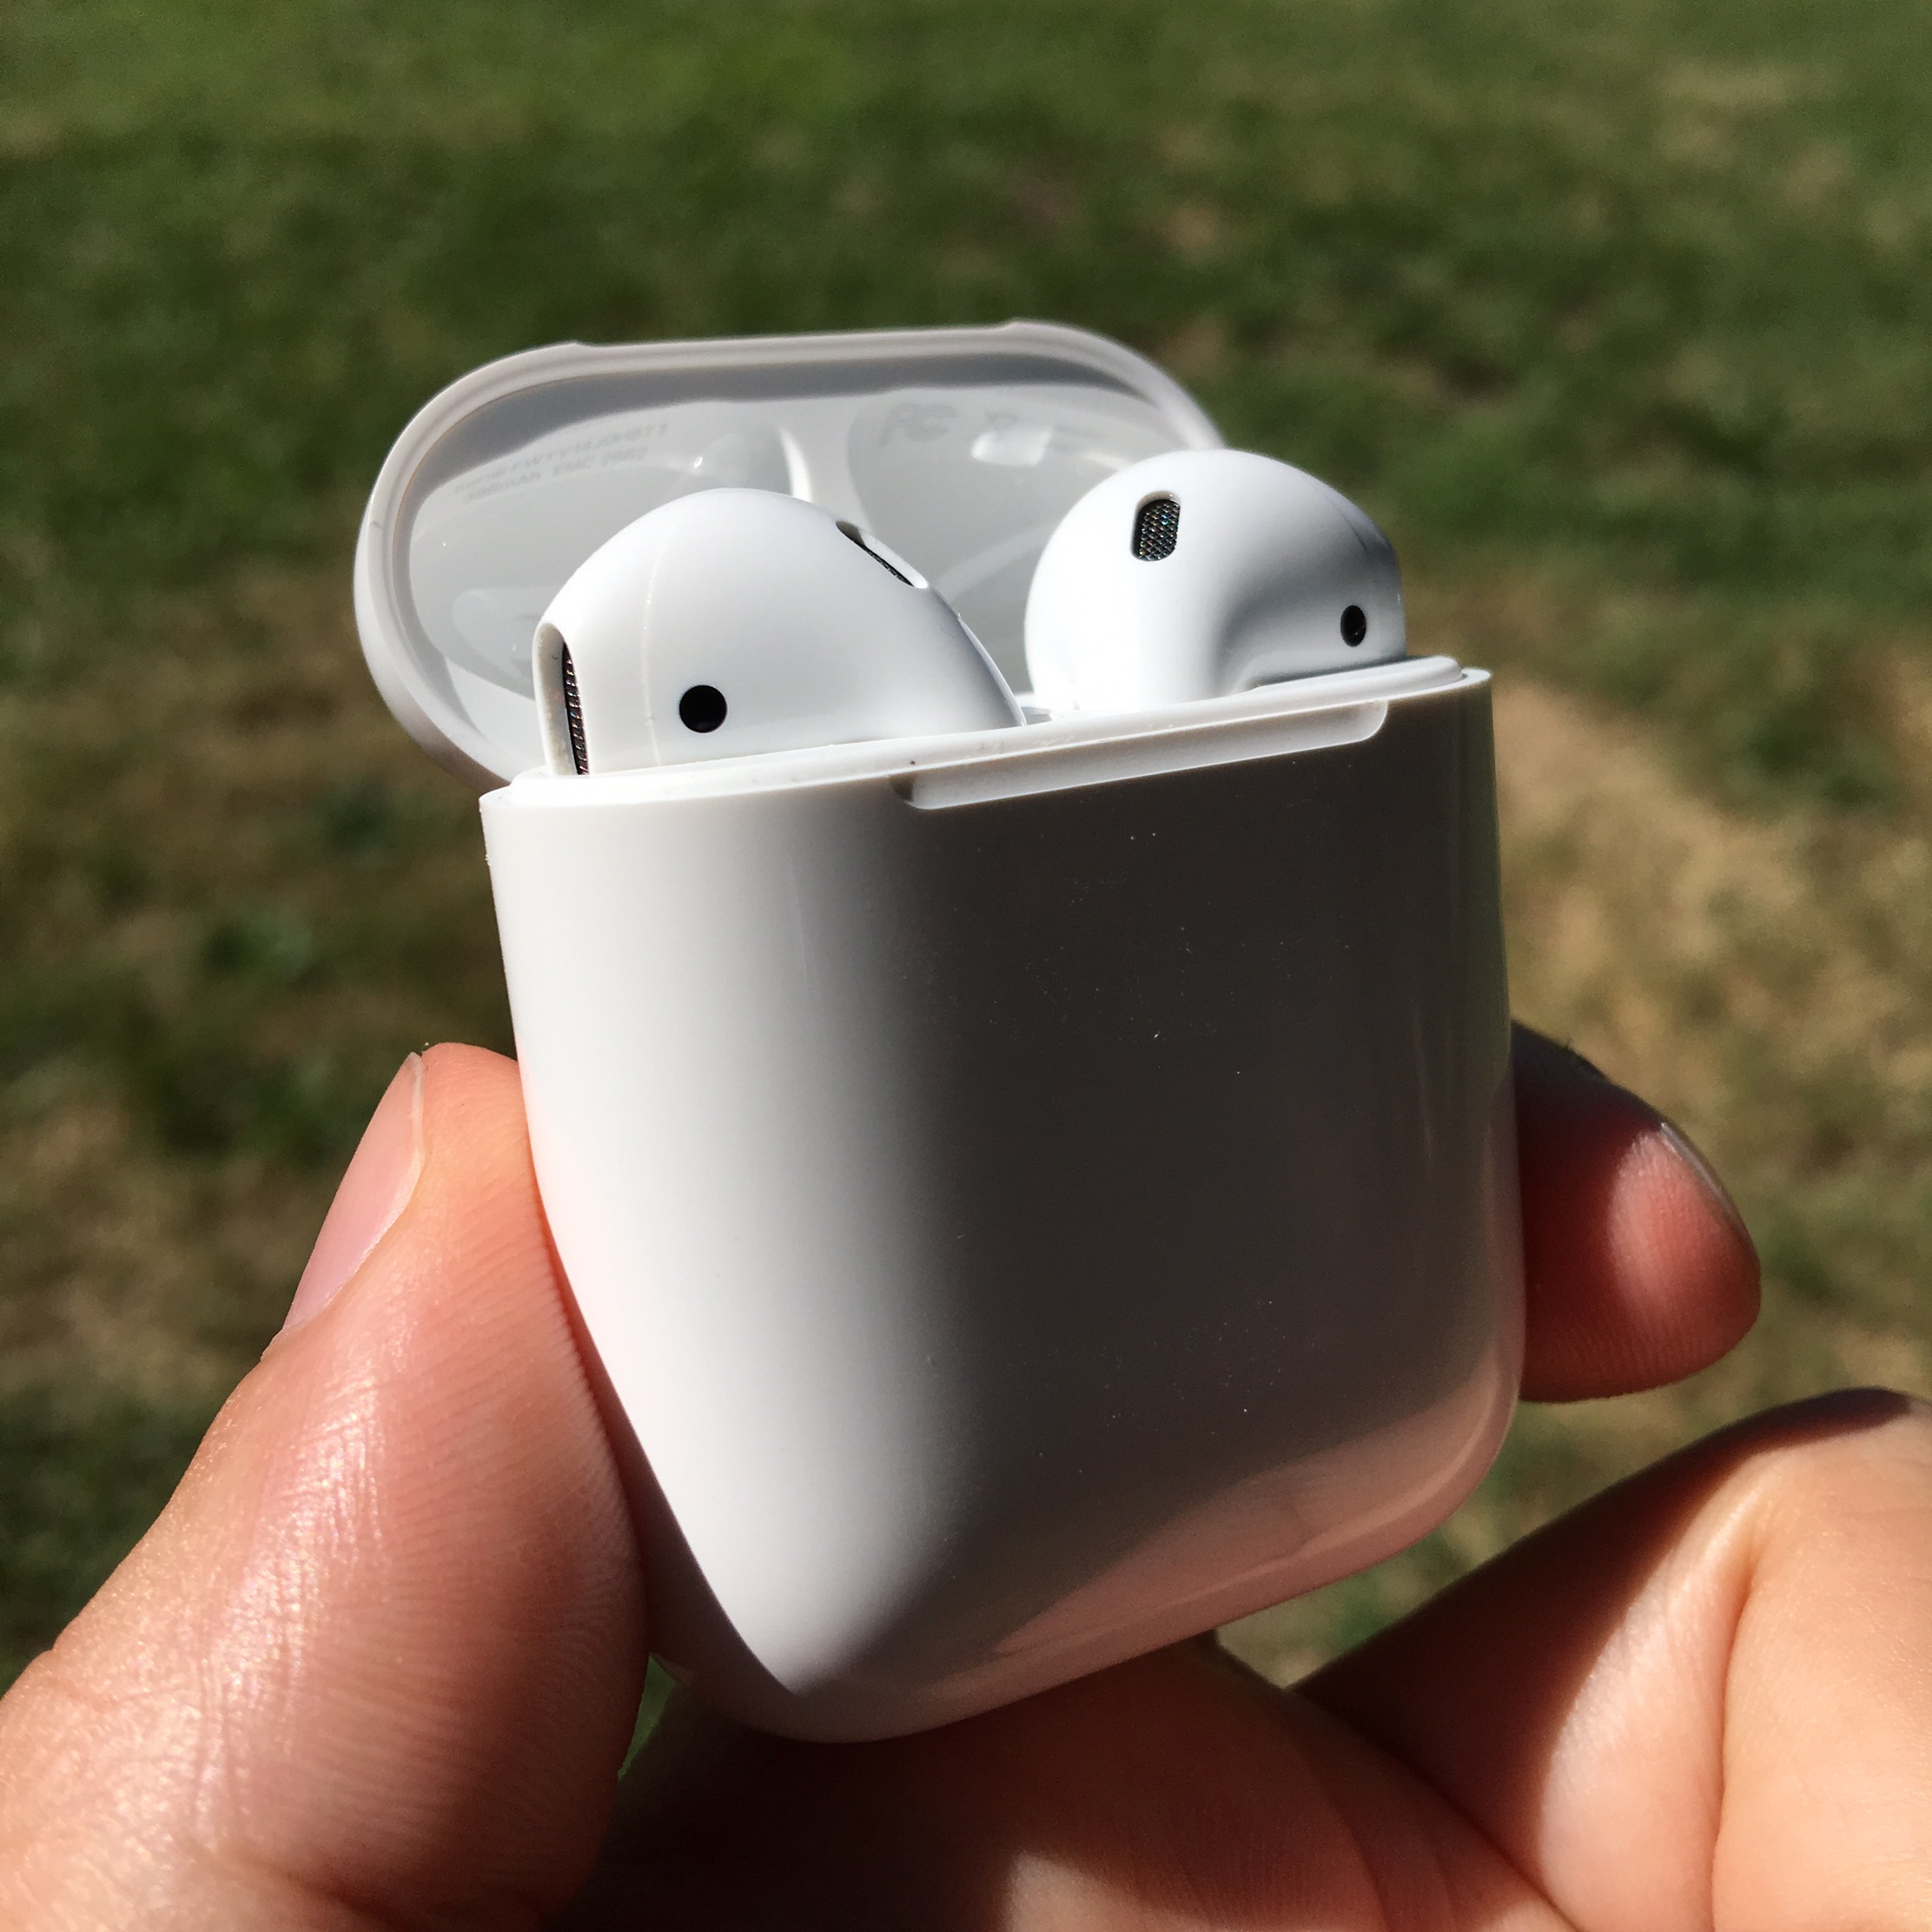 A Week with AirPods